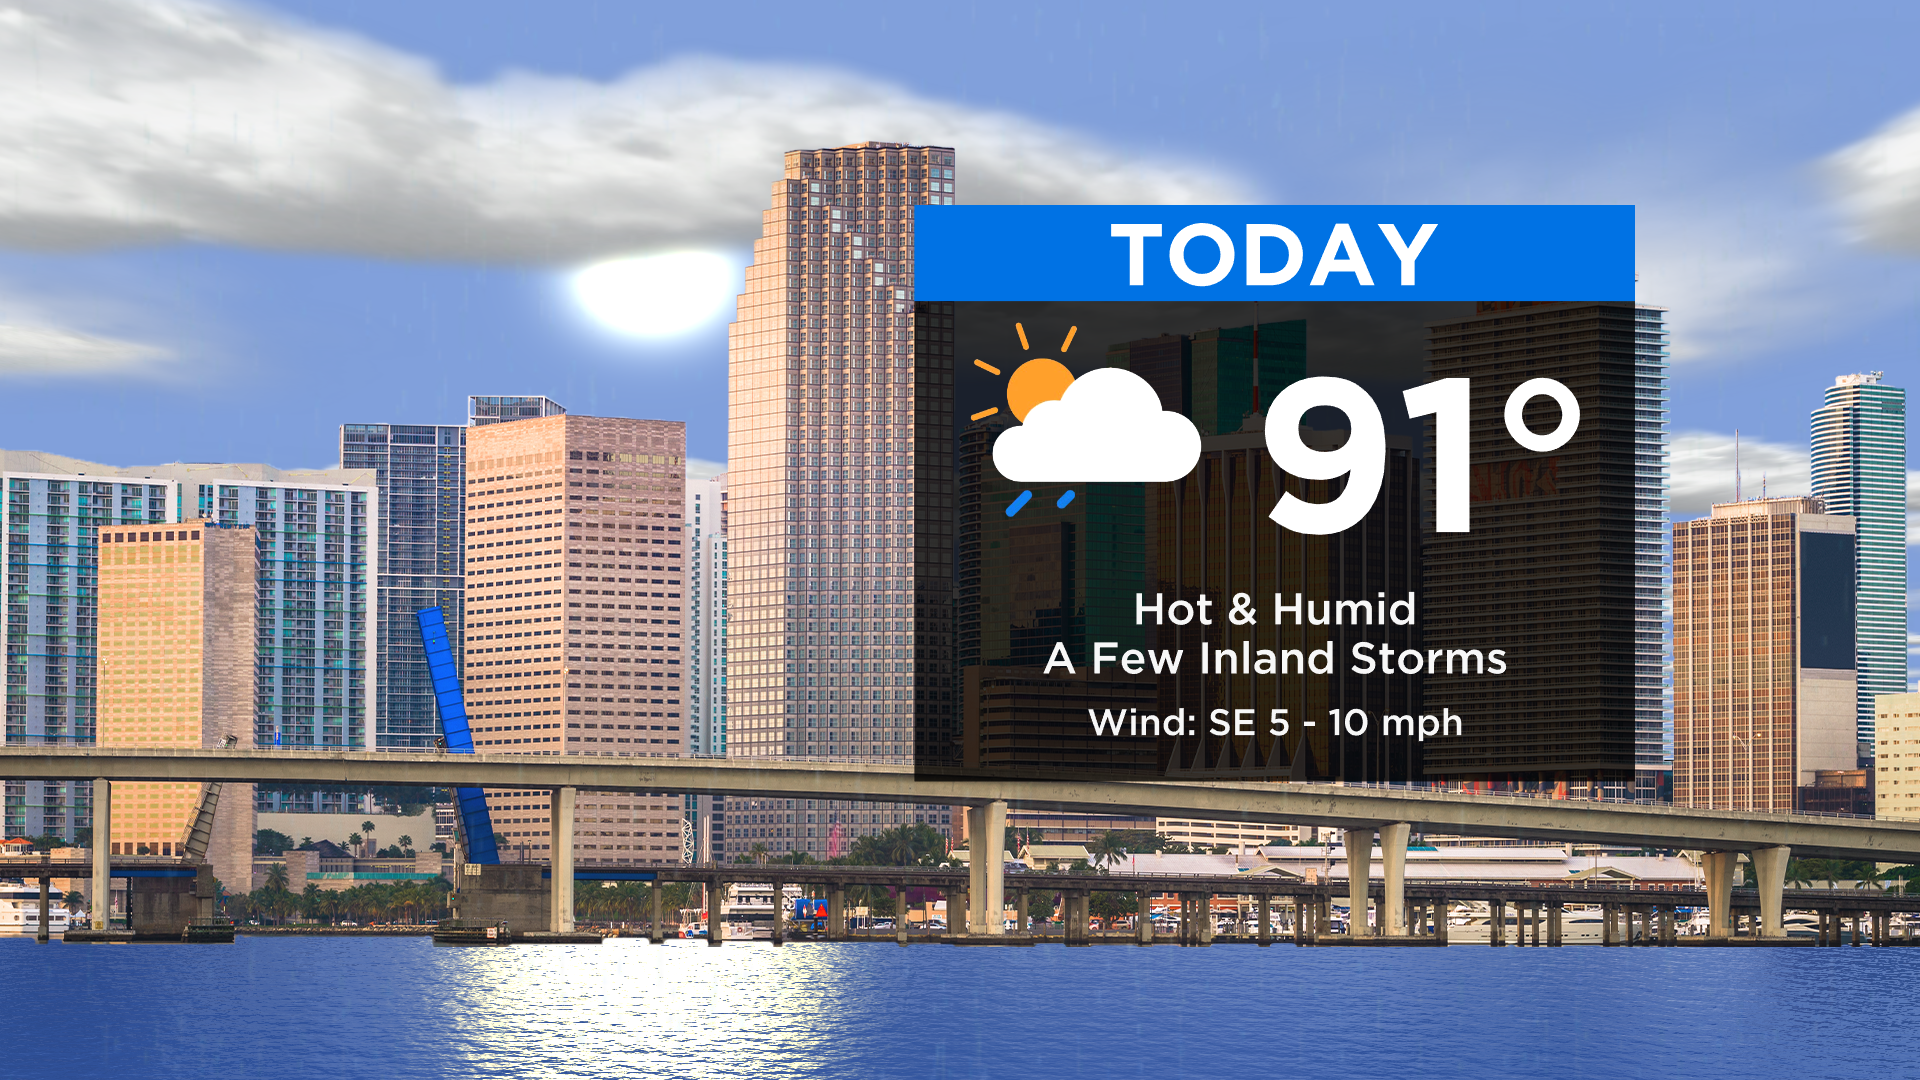 Miami Weather: Hot & Humid, Inland Storms Possible